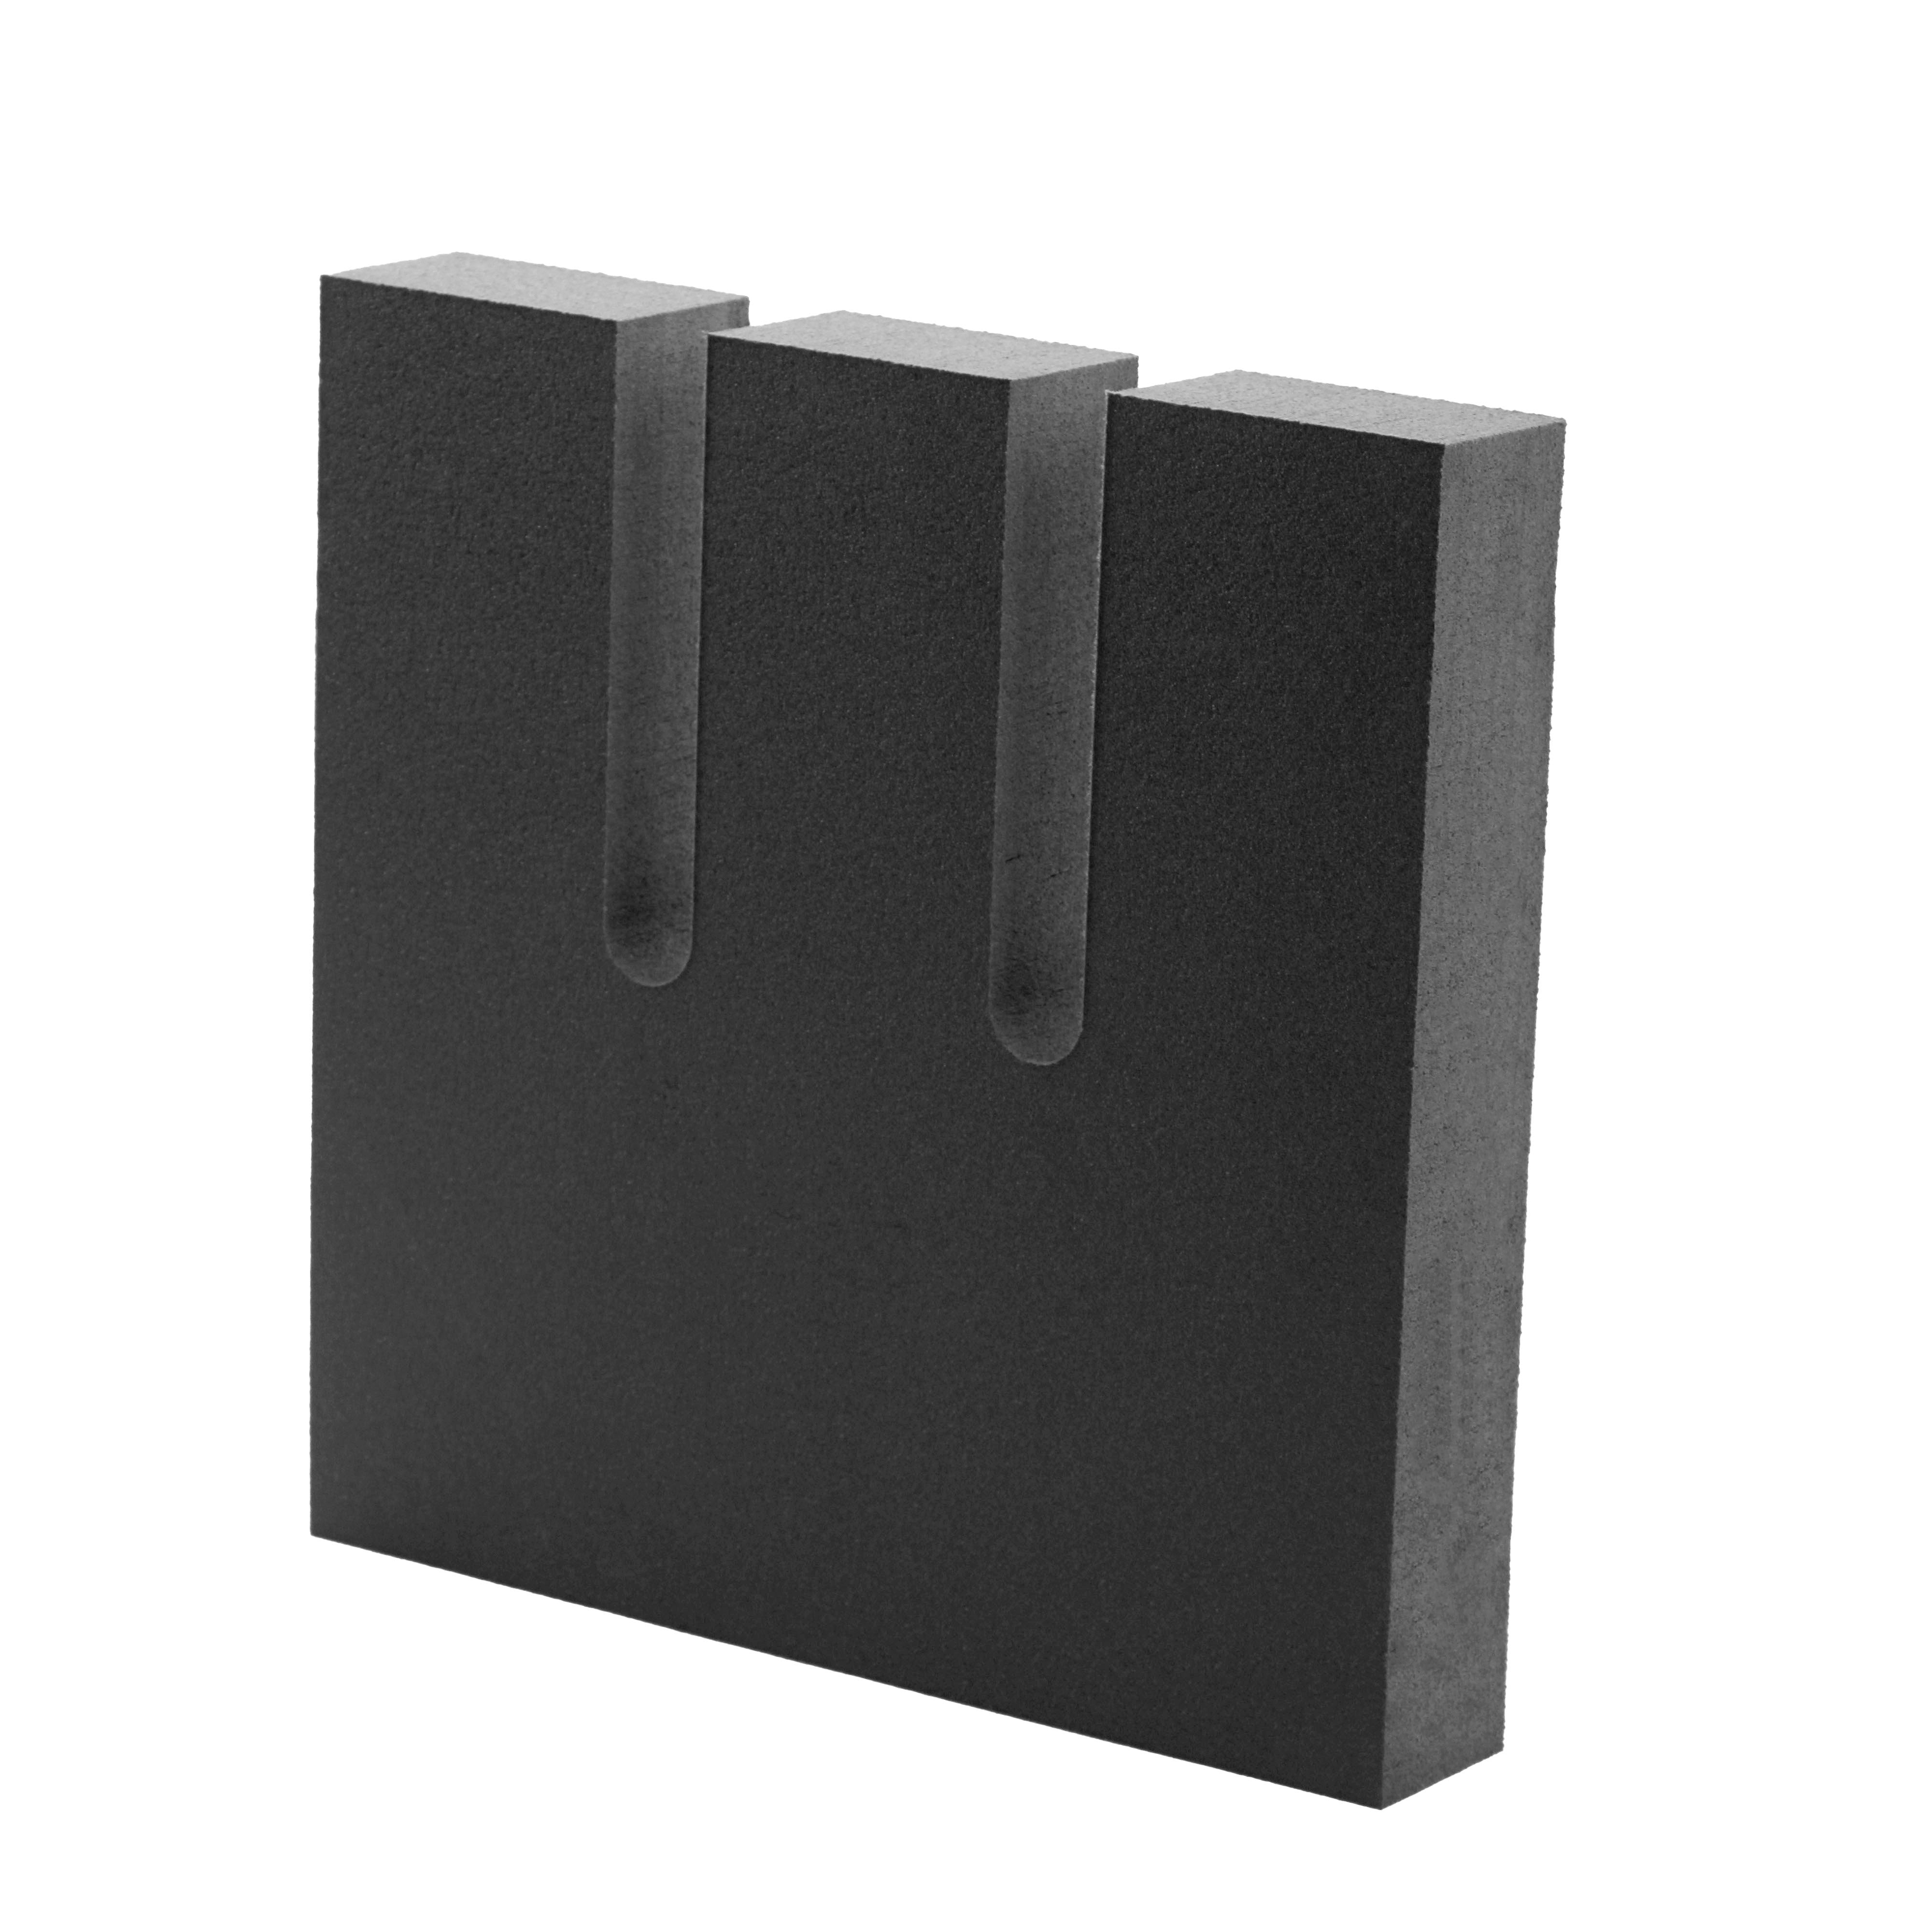 Heavy Duty Foam Dunnage Reusable Cushion for Shipping Box Crate Straight Slot 12x12x2 1 Pack